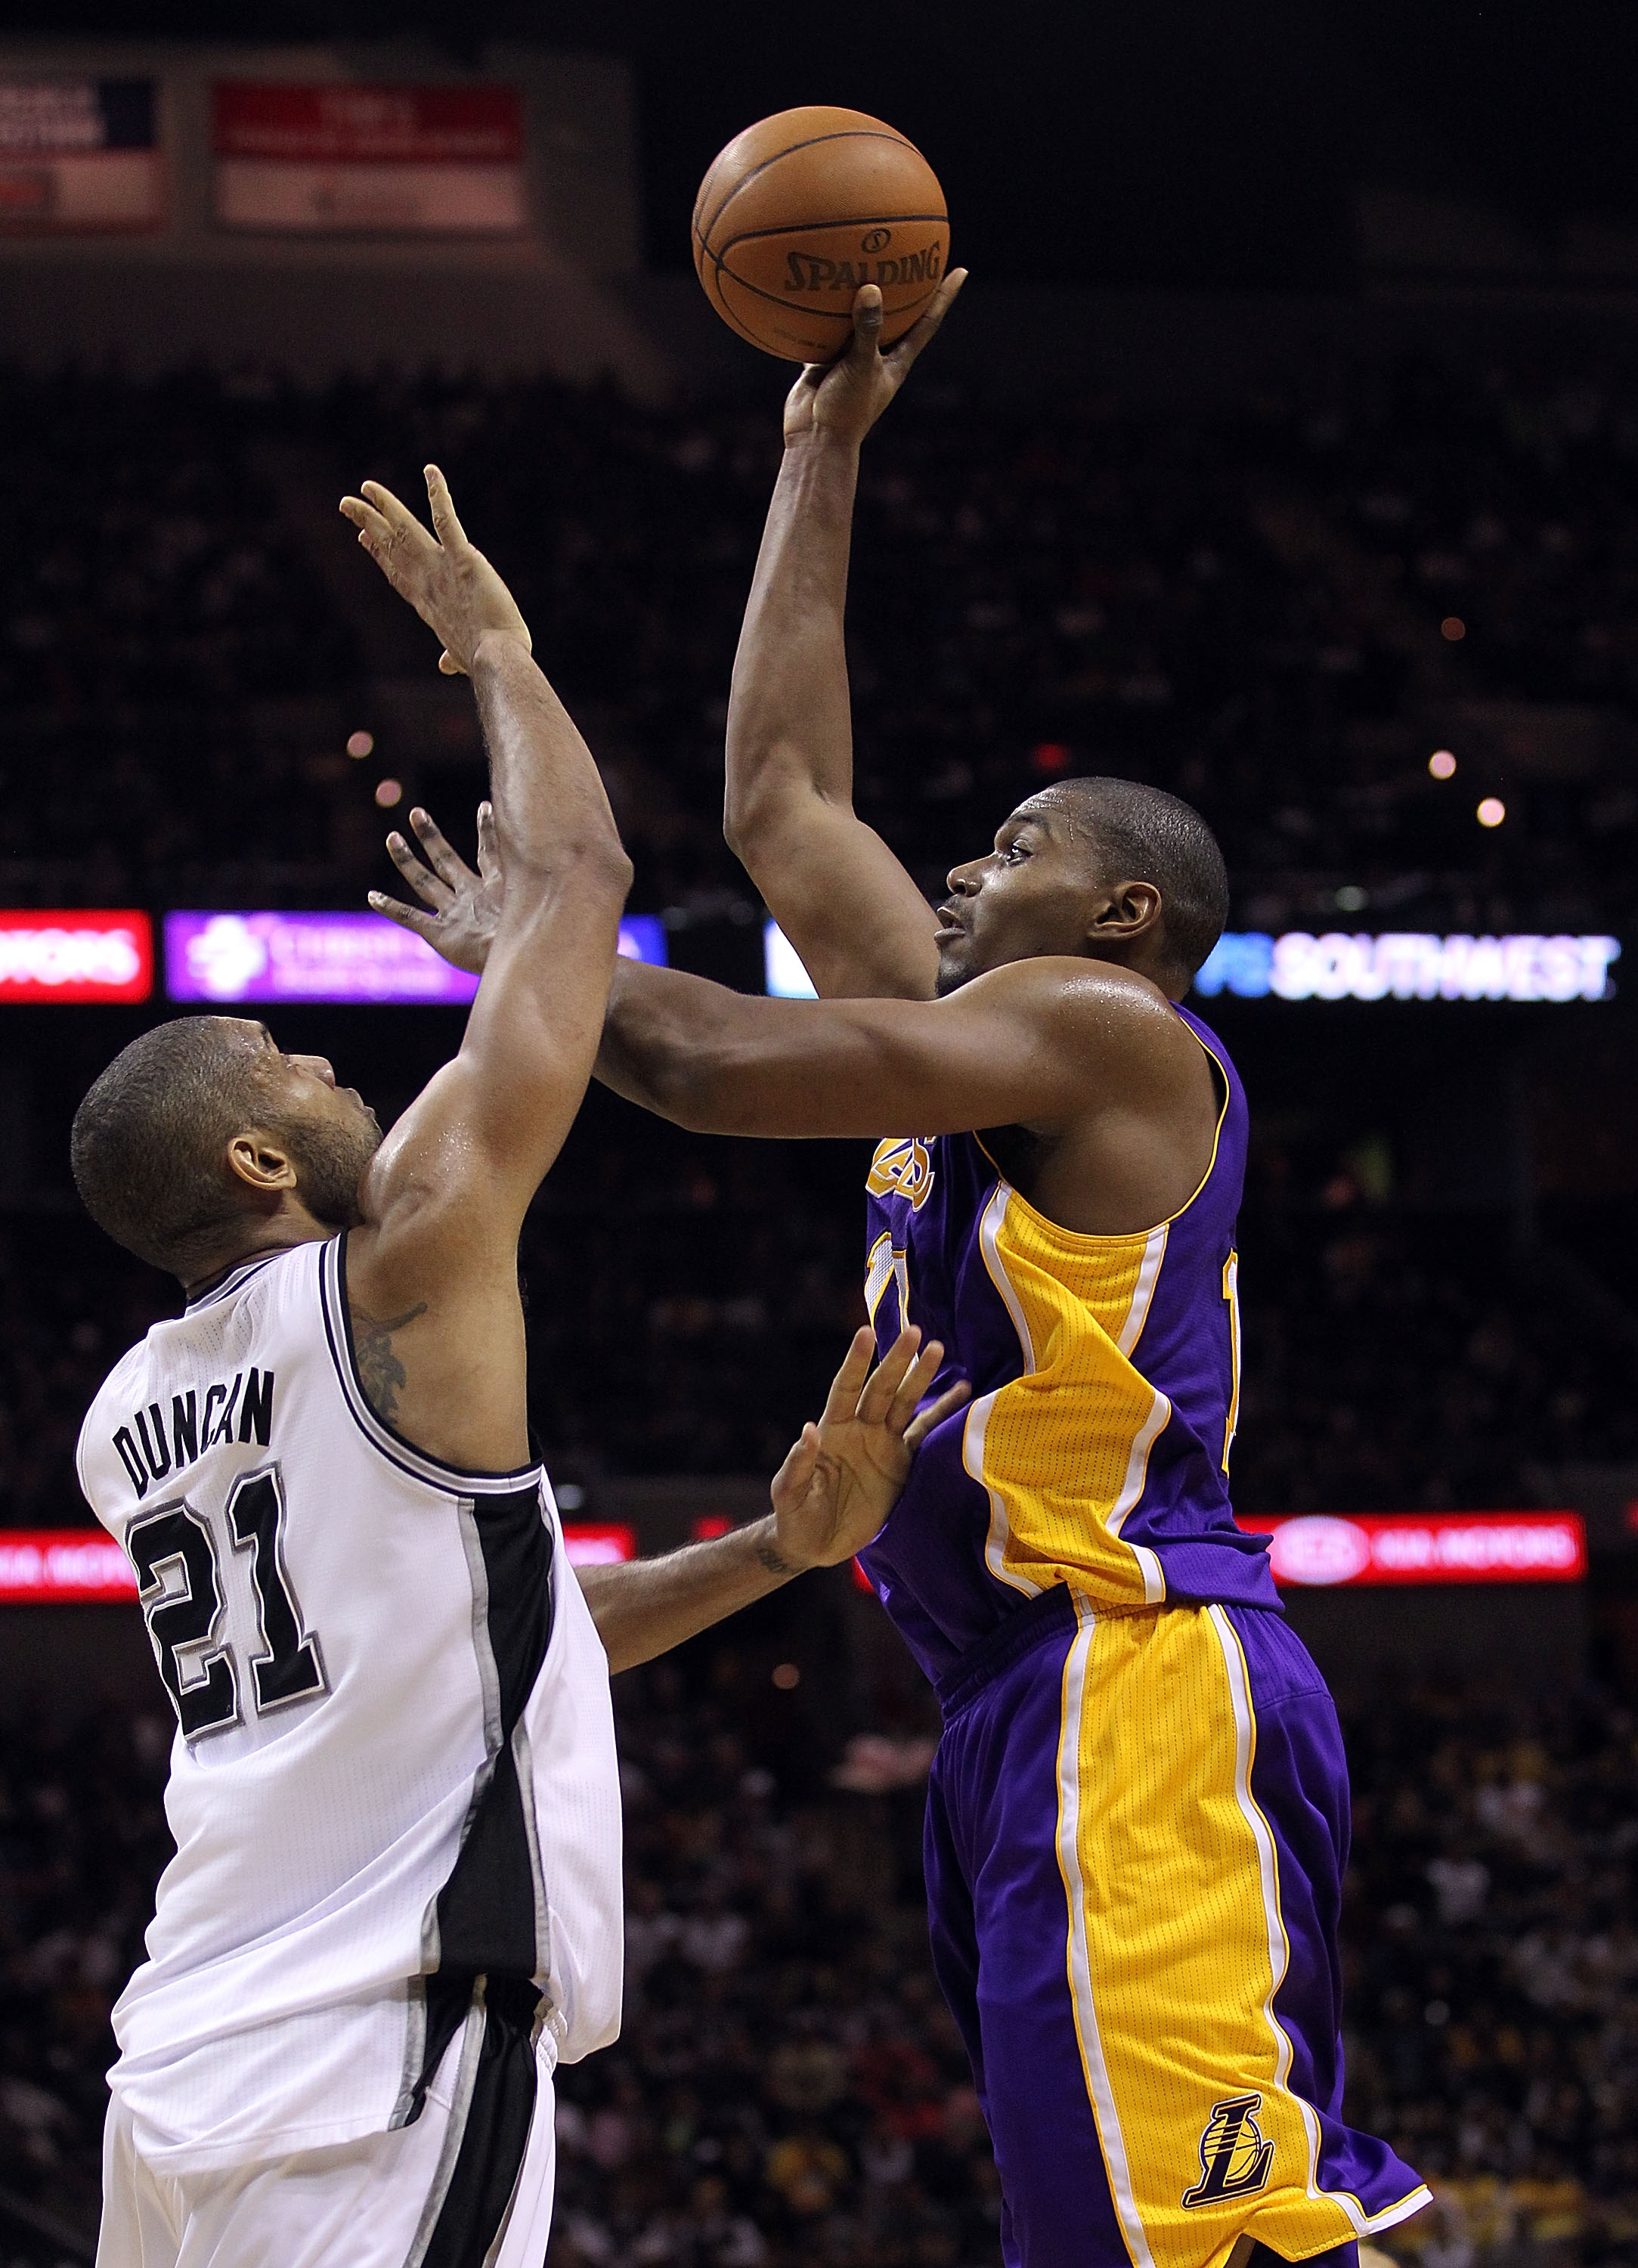 SAN ANTONIO, TX - DECEMBER 28:  Center Andrew Bynum #17 of the Los Angeles Lakers takes a shot against Tim Duncan #21 of the San Antonio Spurs at AT&T Center on December 28, 2010 in San Antonio, Texas.  NOTE TO USER: User expressly acknowledges and agrees